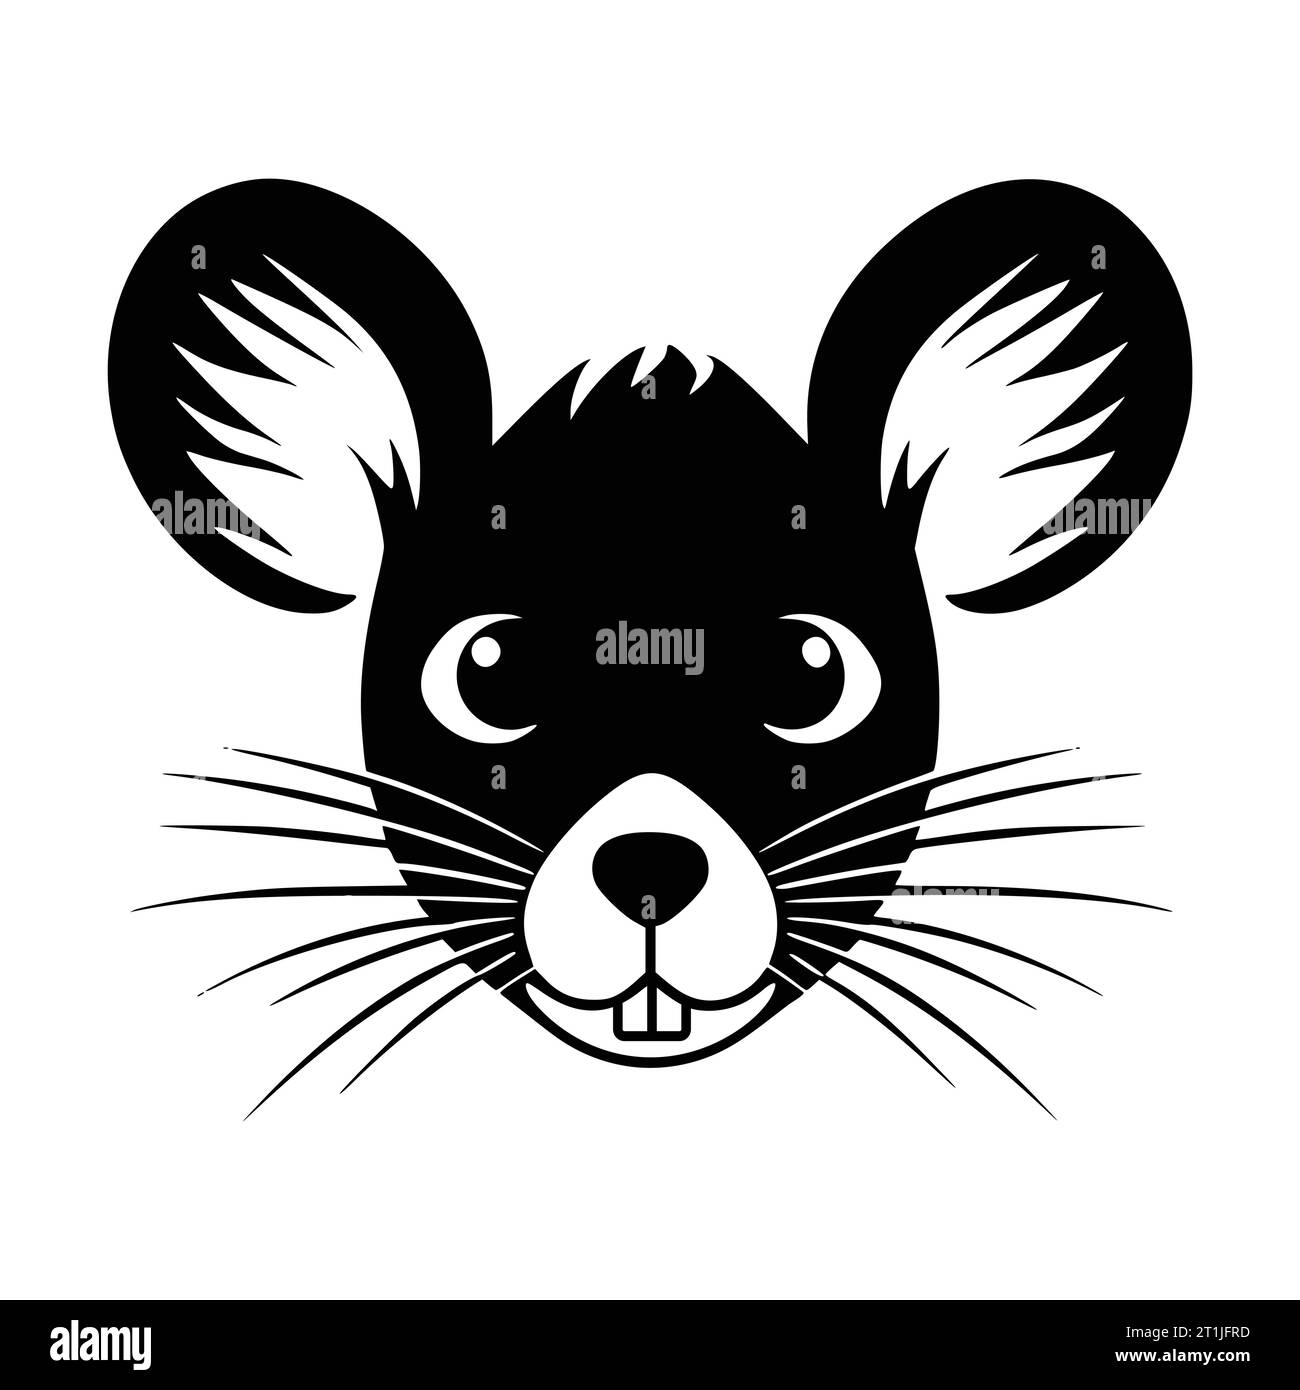 rat mouse rodent mammal wild animal head illustration for logo or symbol Stock Vector